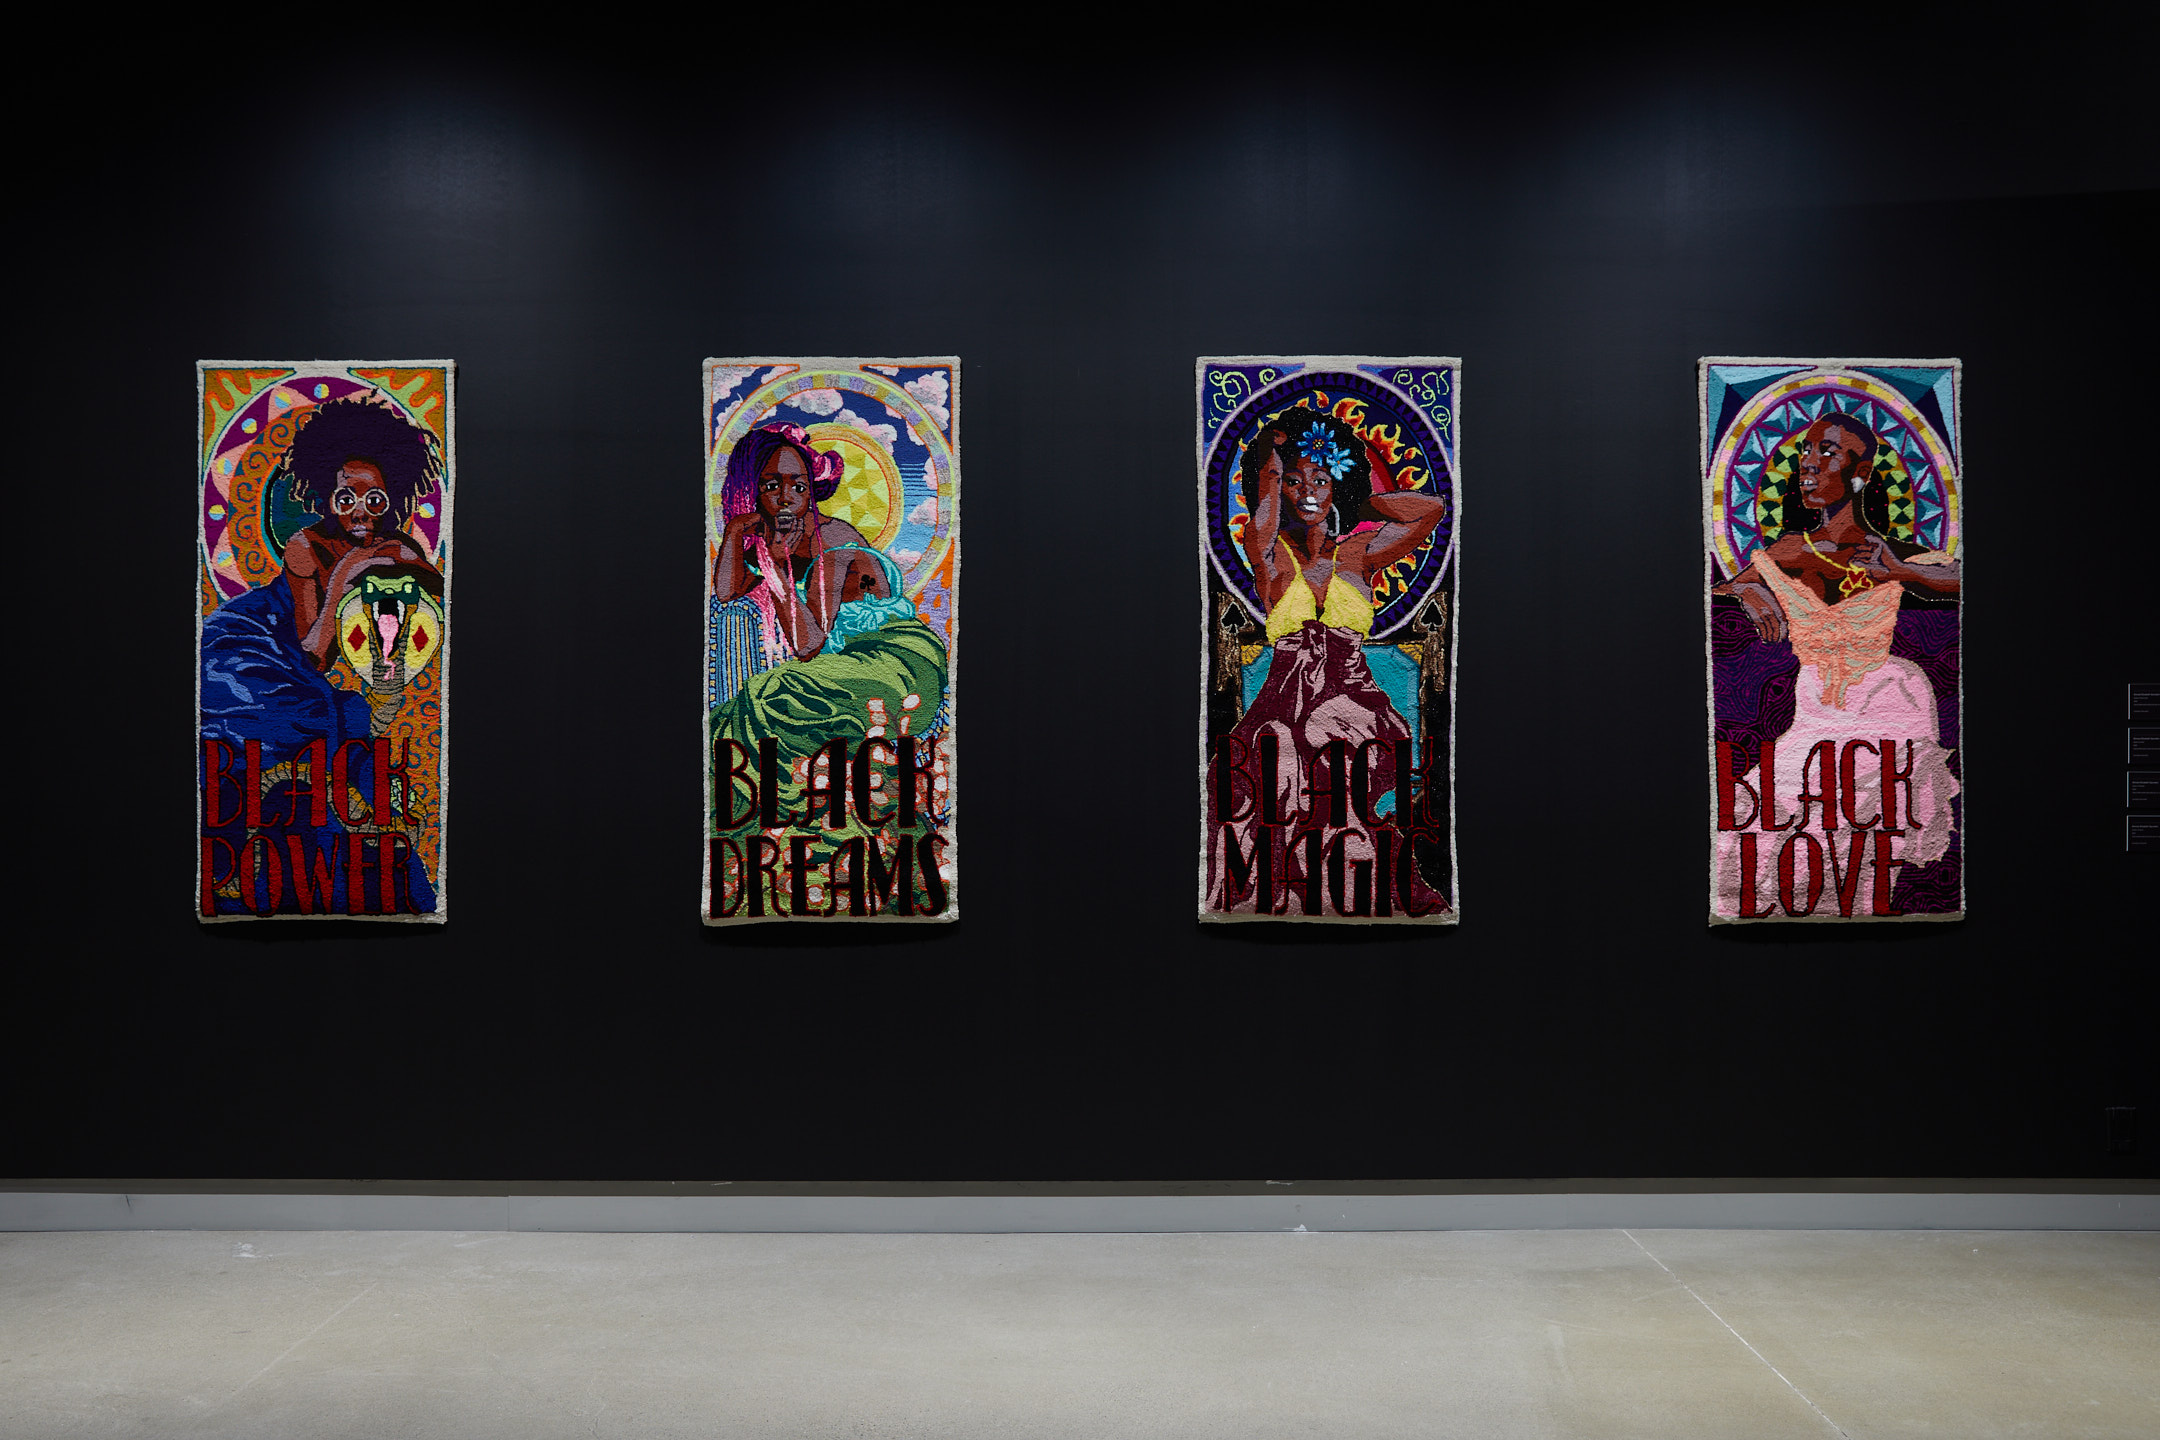 Four tapestries hang side-by-side in an exhibit, each featuring a black woman.